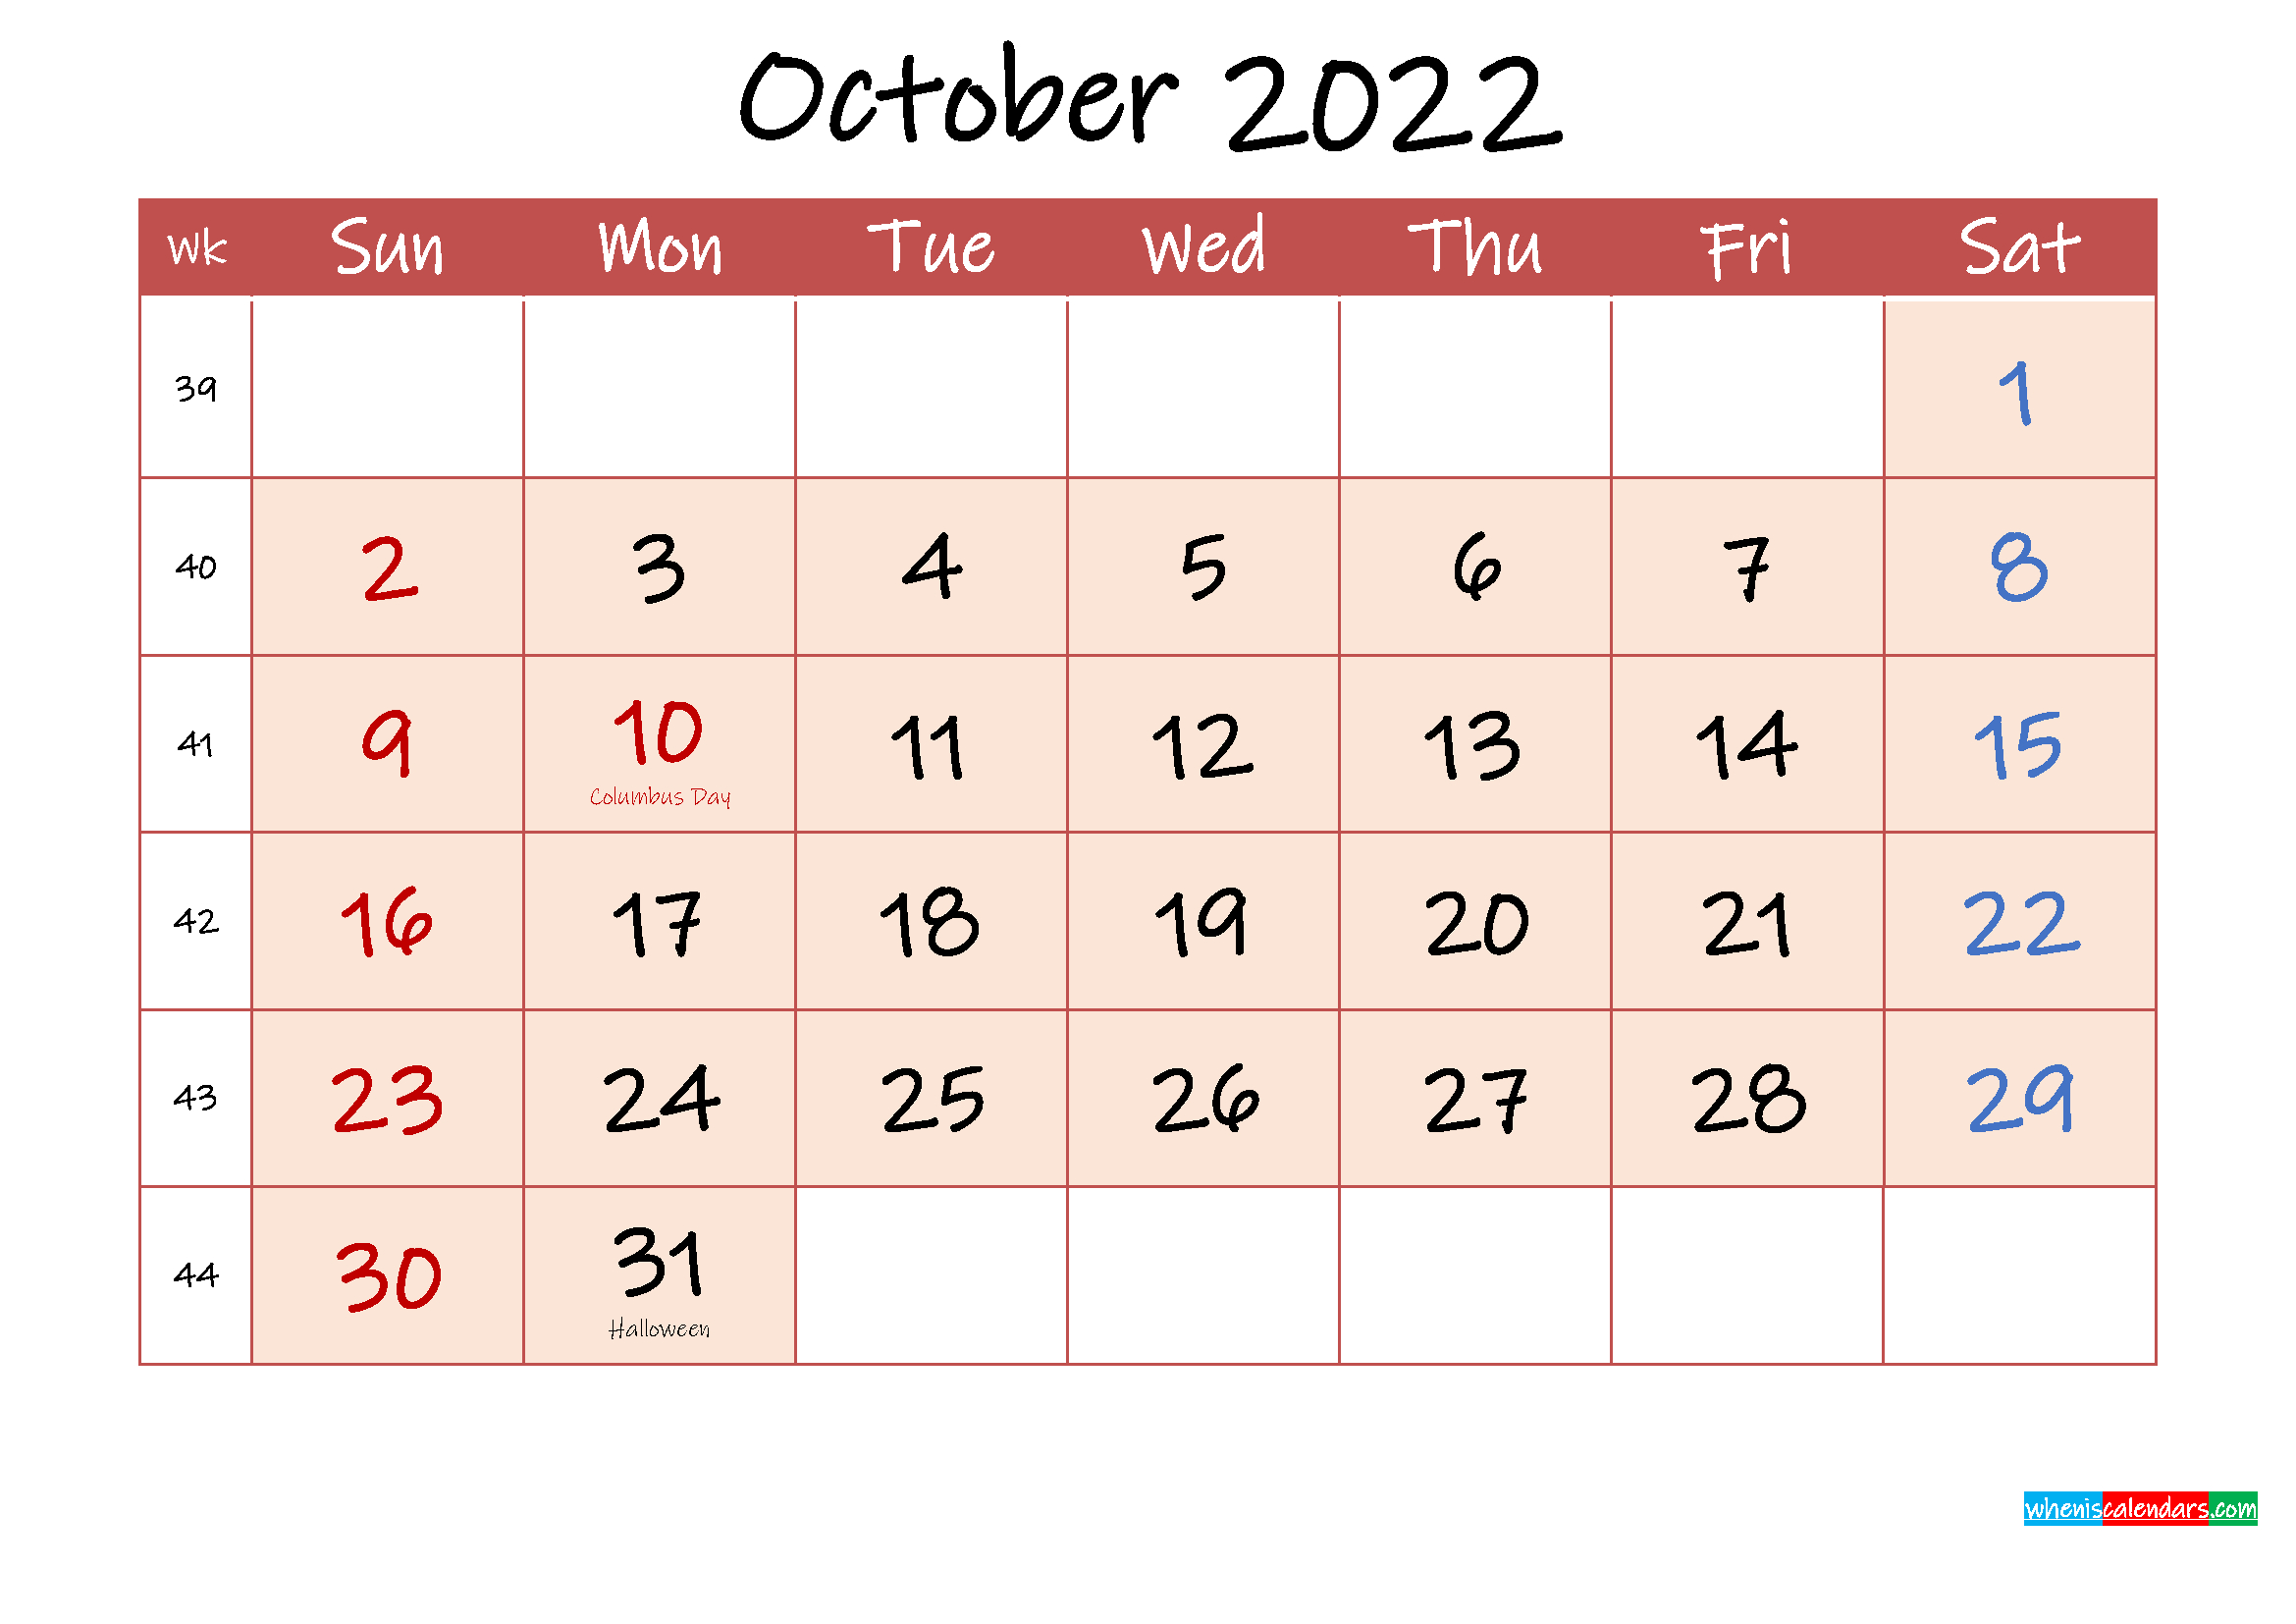 October 2022 Free Printable Calendar With Holidays  Free Printable October 2022 Calendar